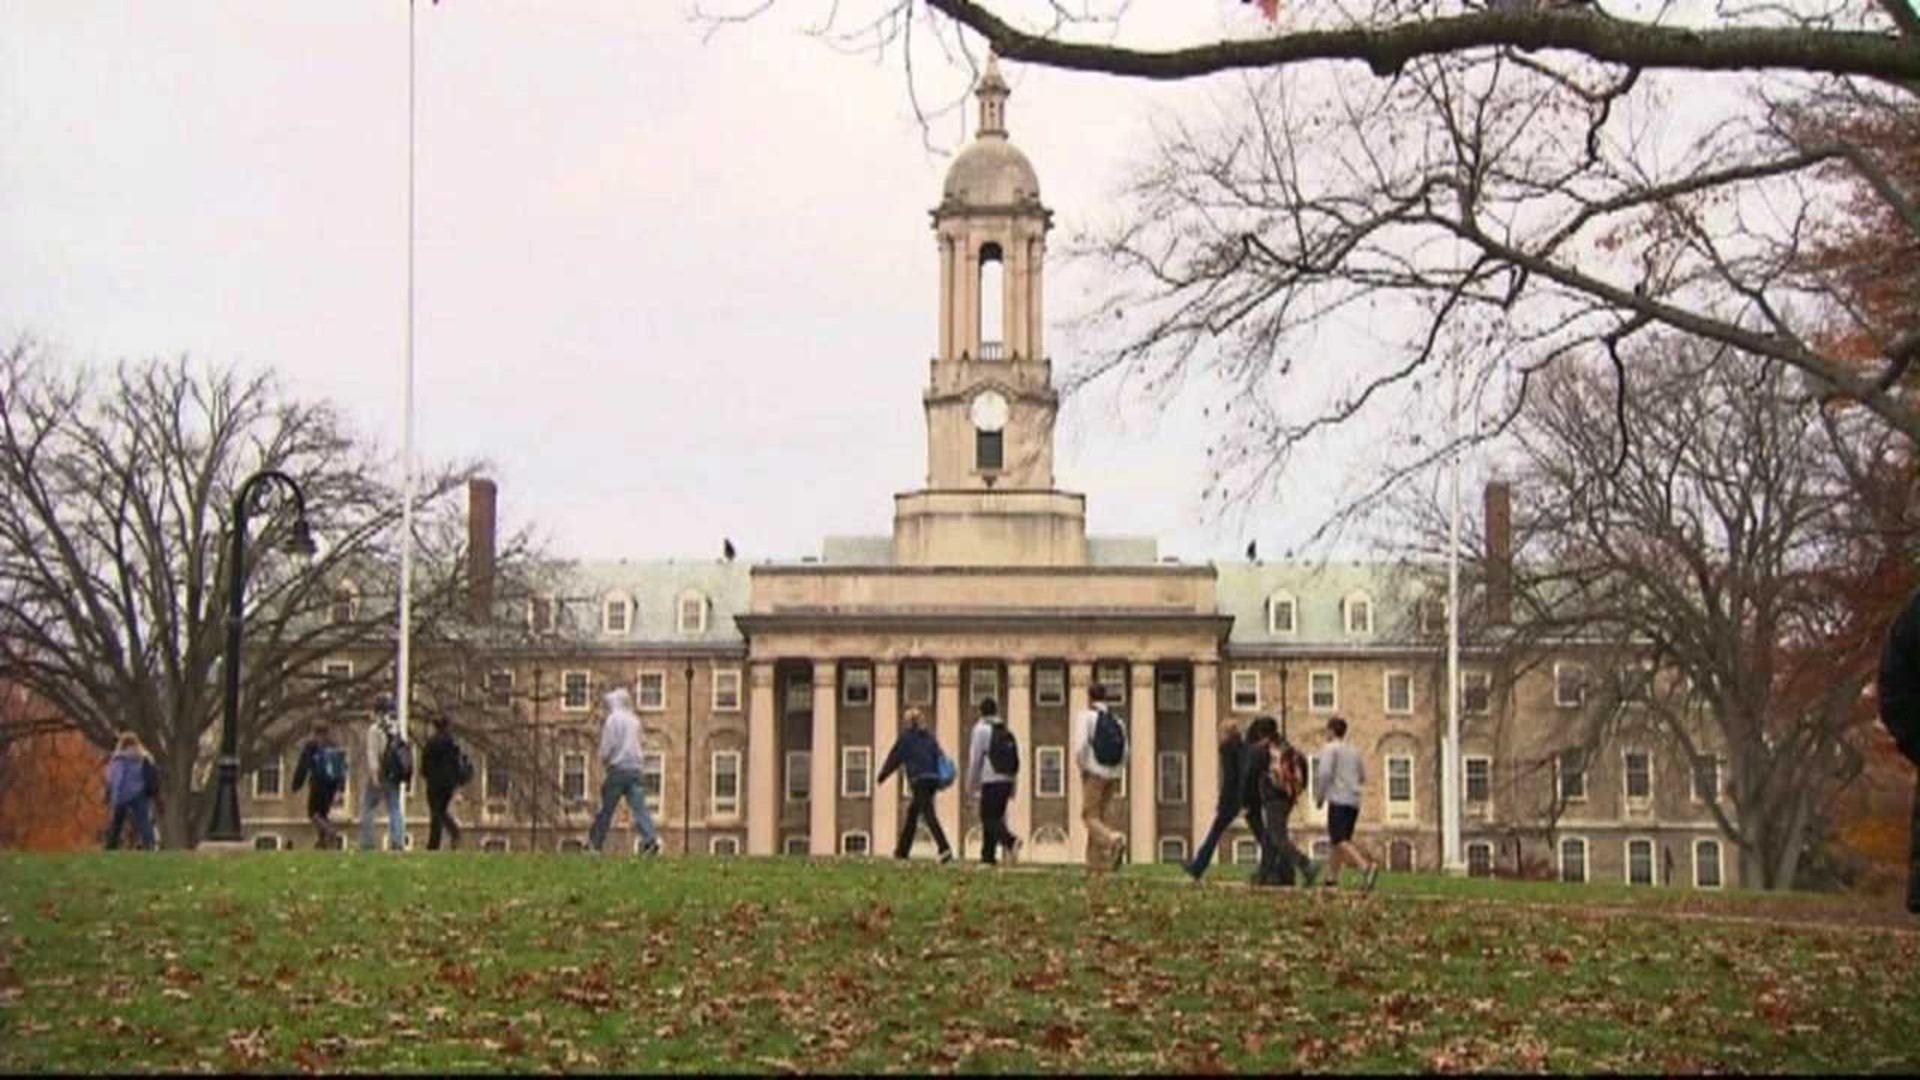 Penn State will have to make major changes to its Title IX policies, according to The US Secretary of Education.